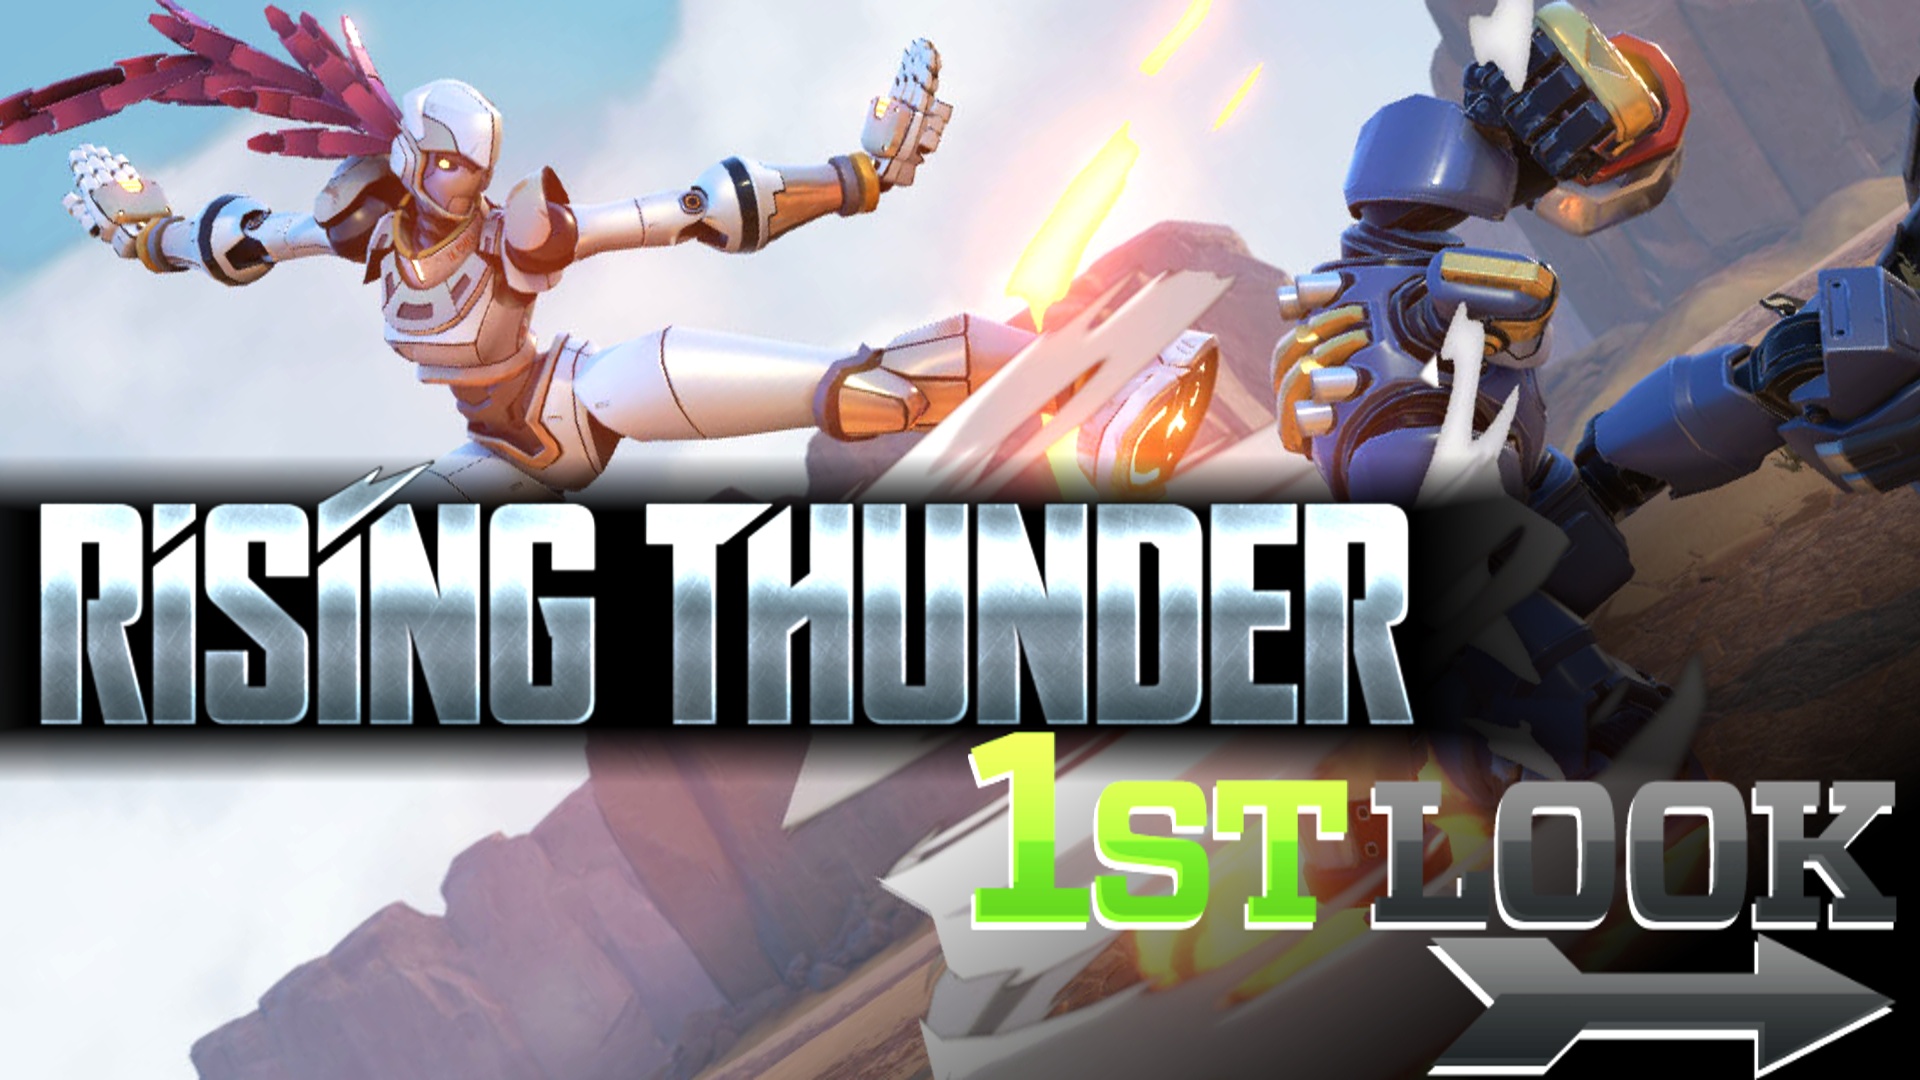 Rising Thunder - First Look Radiant Entertainment